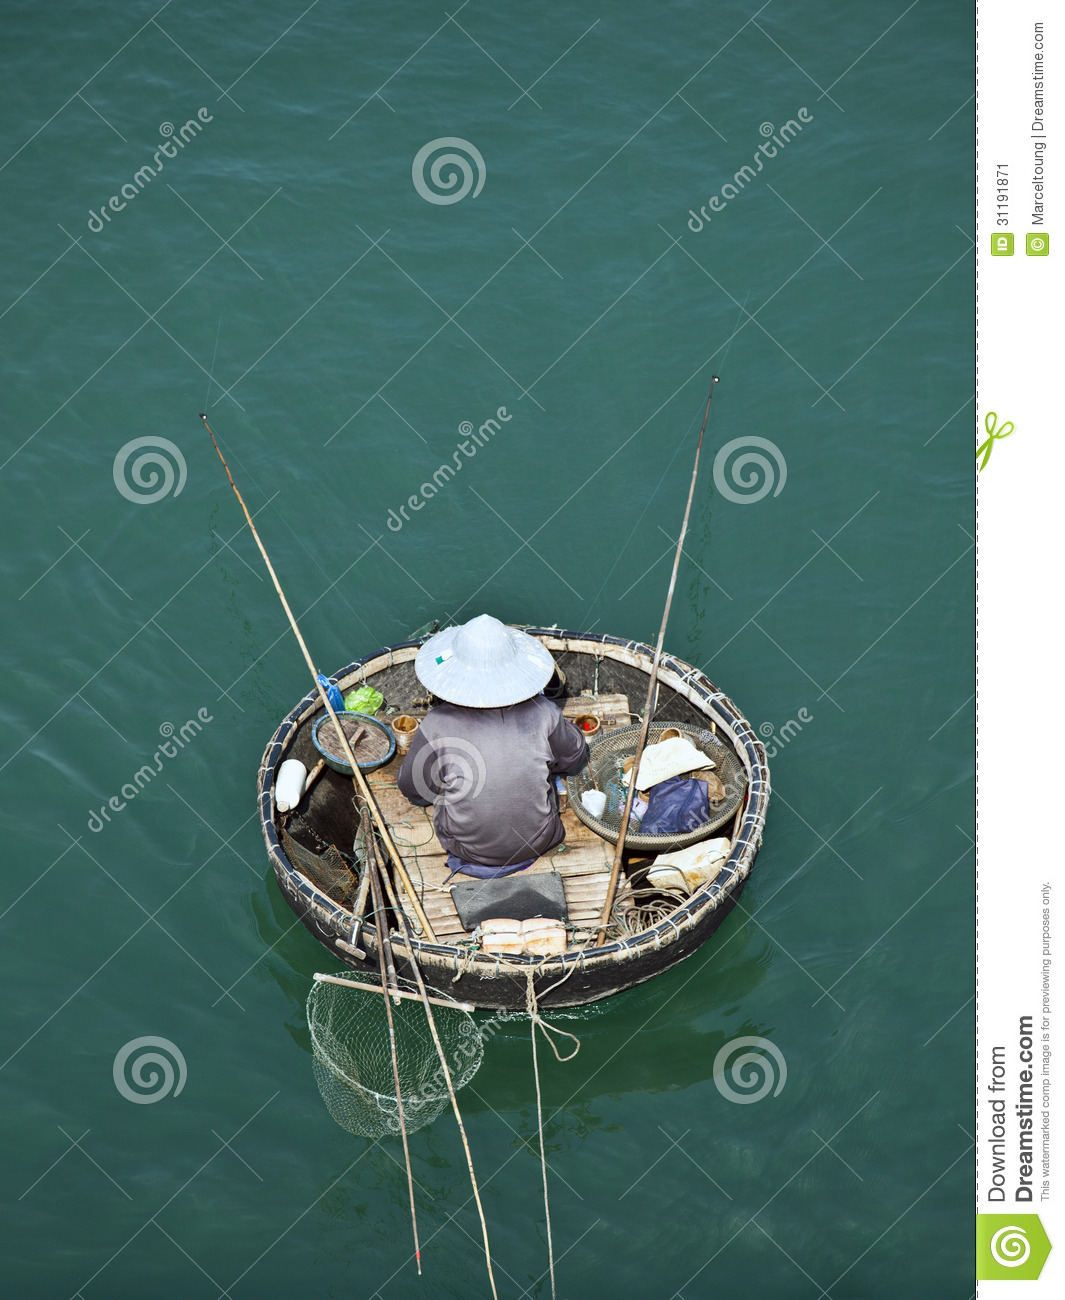 Birds Eye View Of Man In Traditional Round Vietnamese Fishing Boat